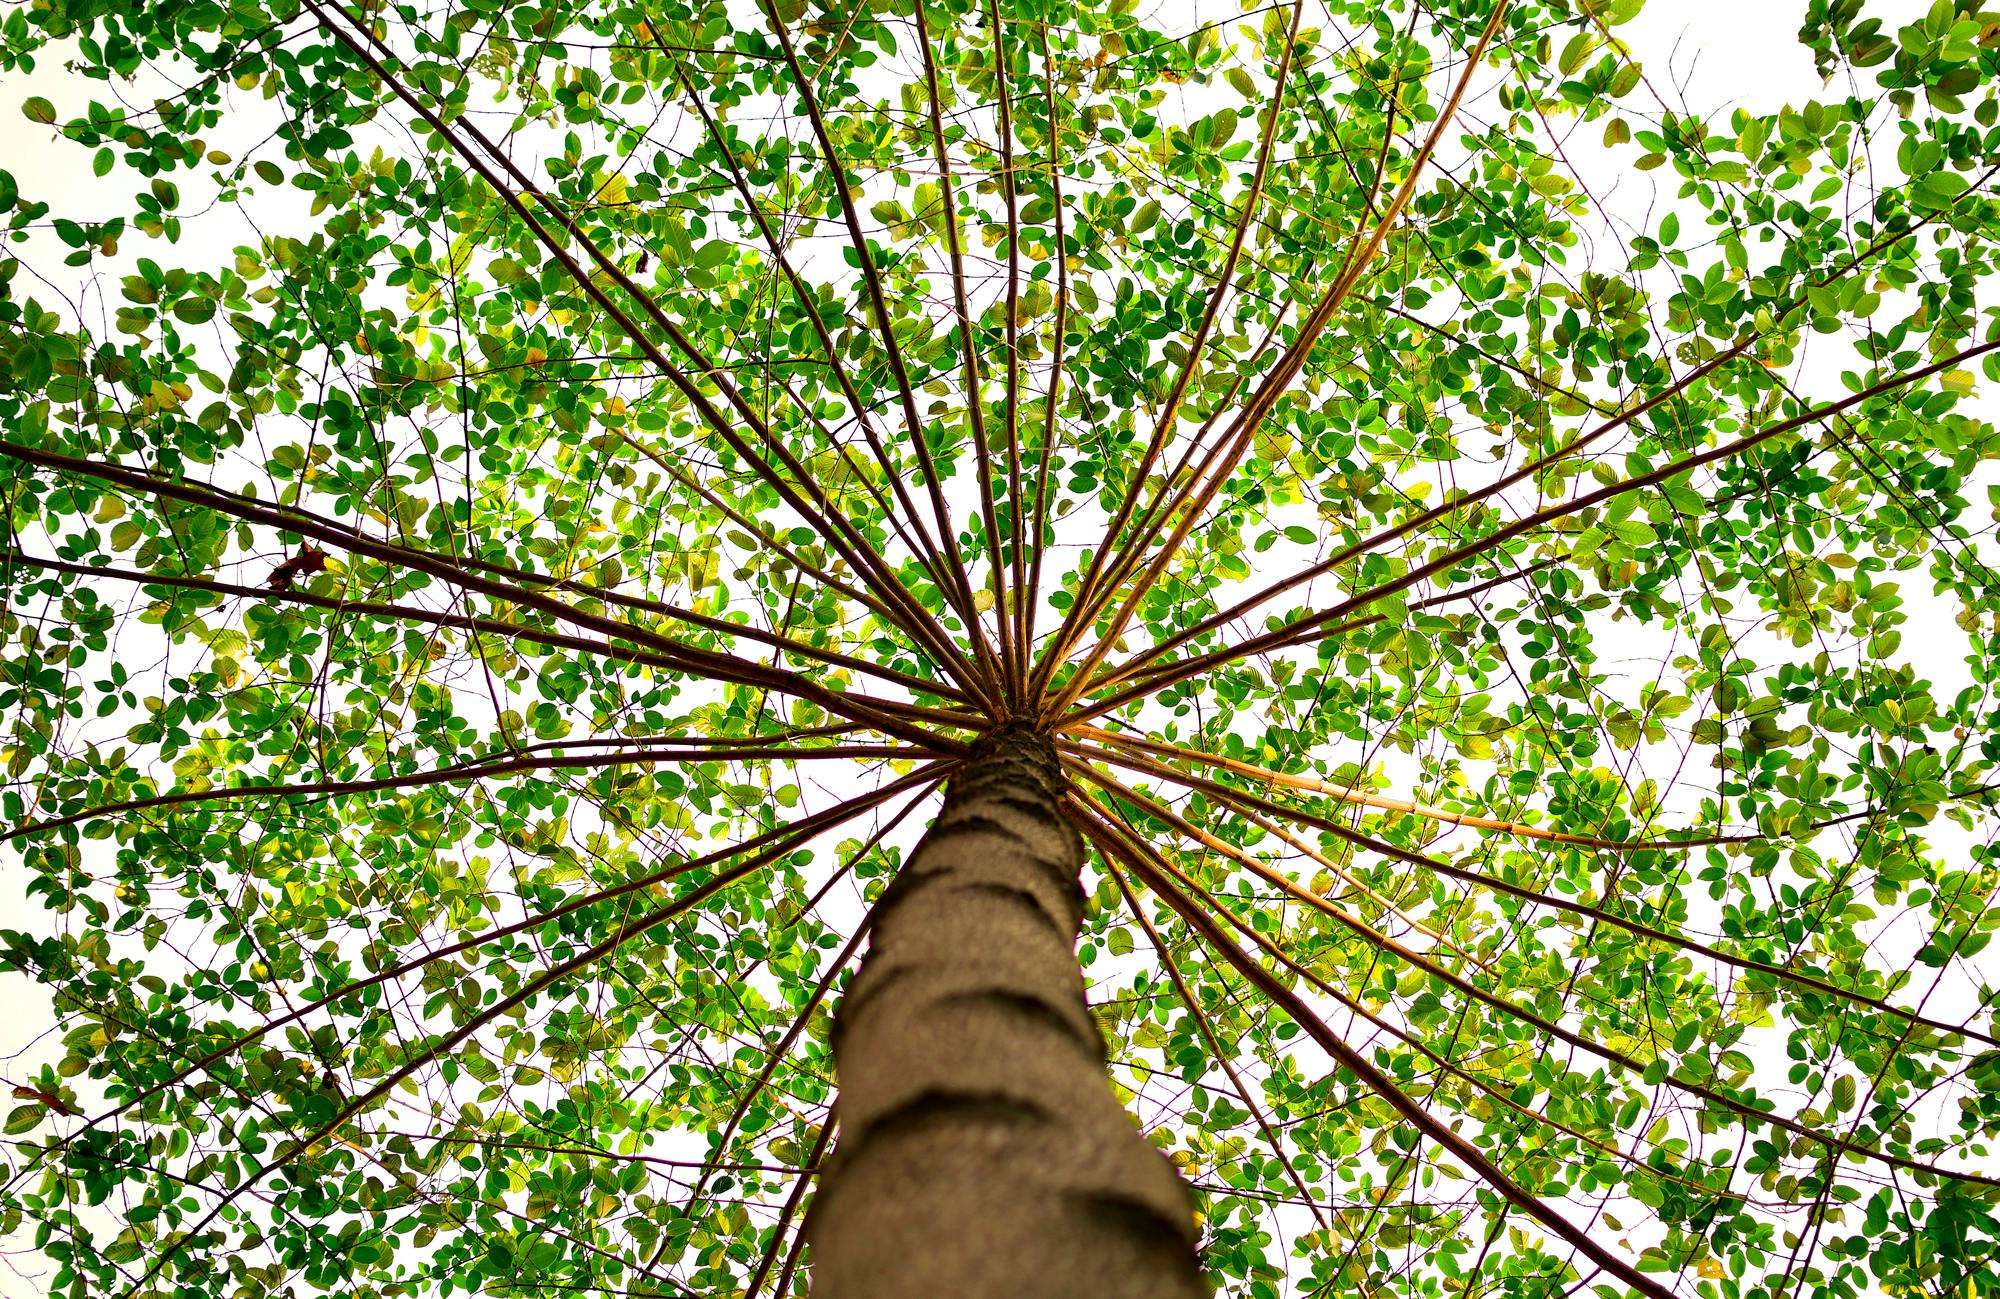 Bottom View of Green Leaved Tree during Daytime · Free 